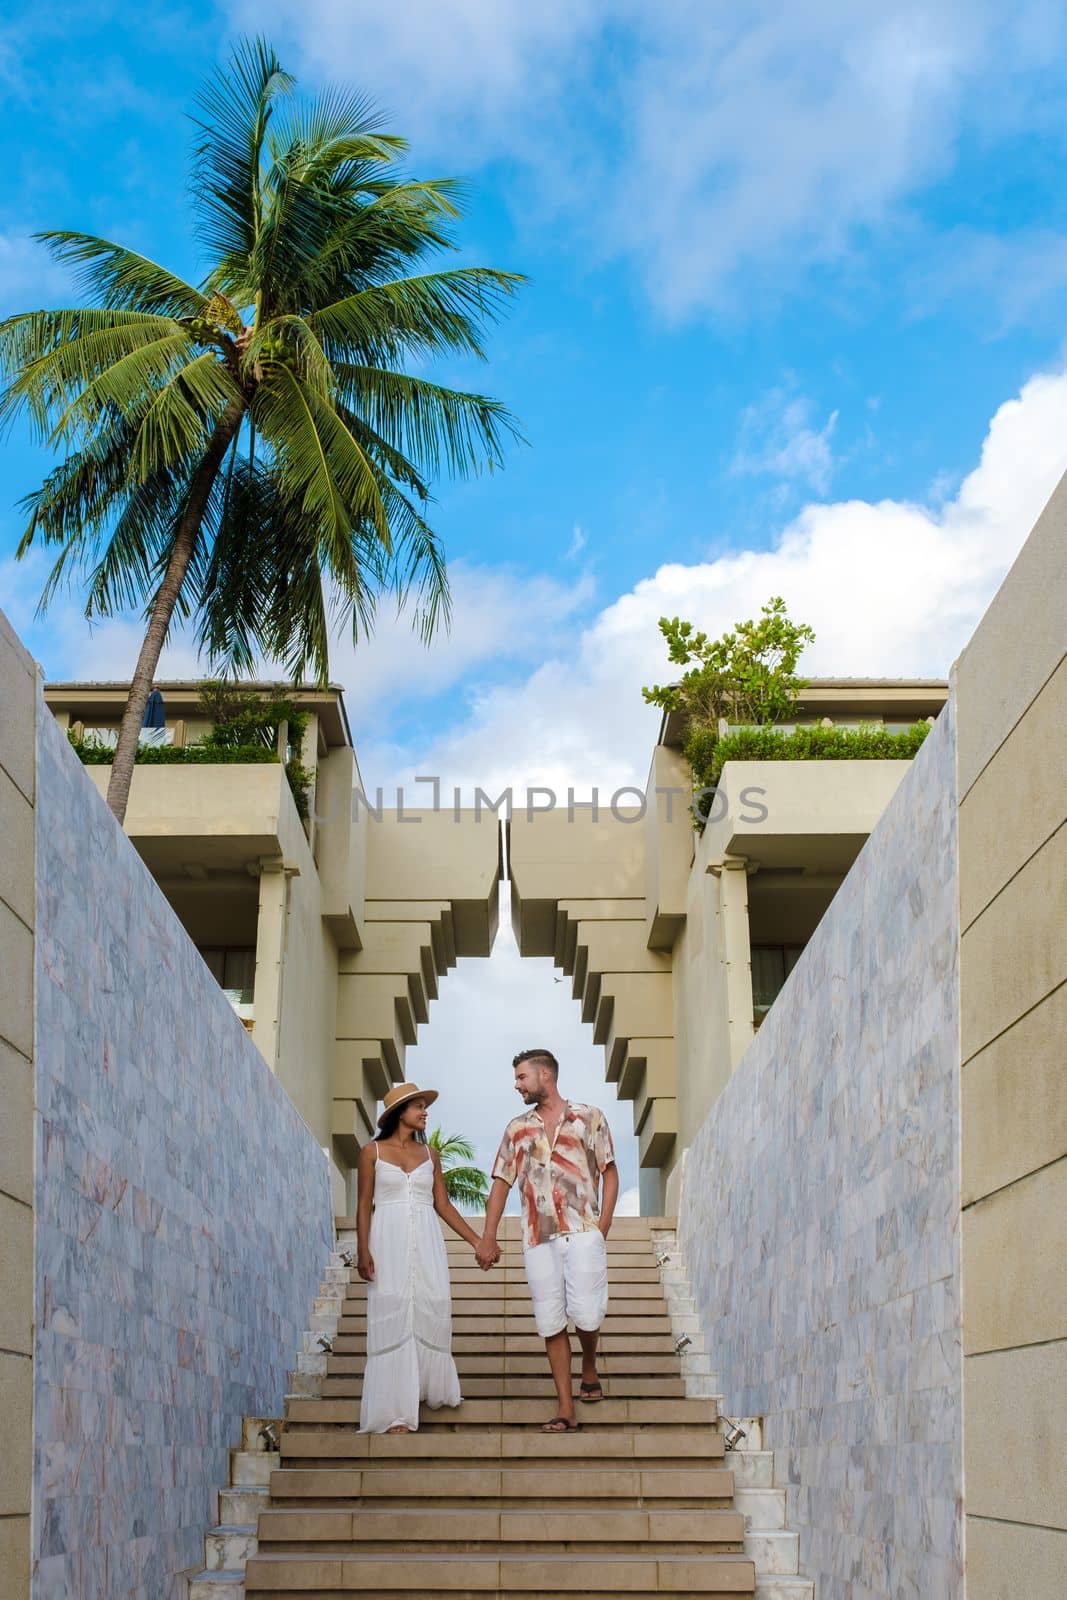 couple of men and women walking at an old gate during vacation at a luxury resort in Thailand.